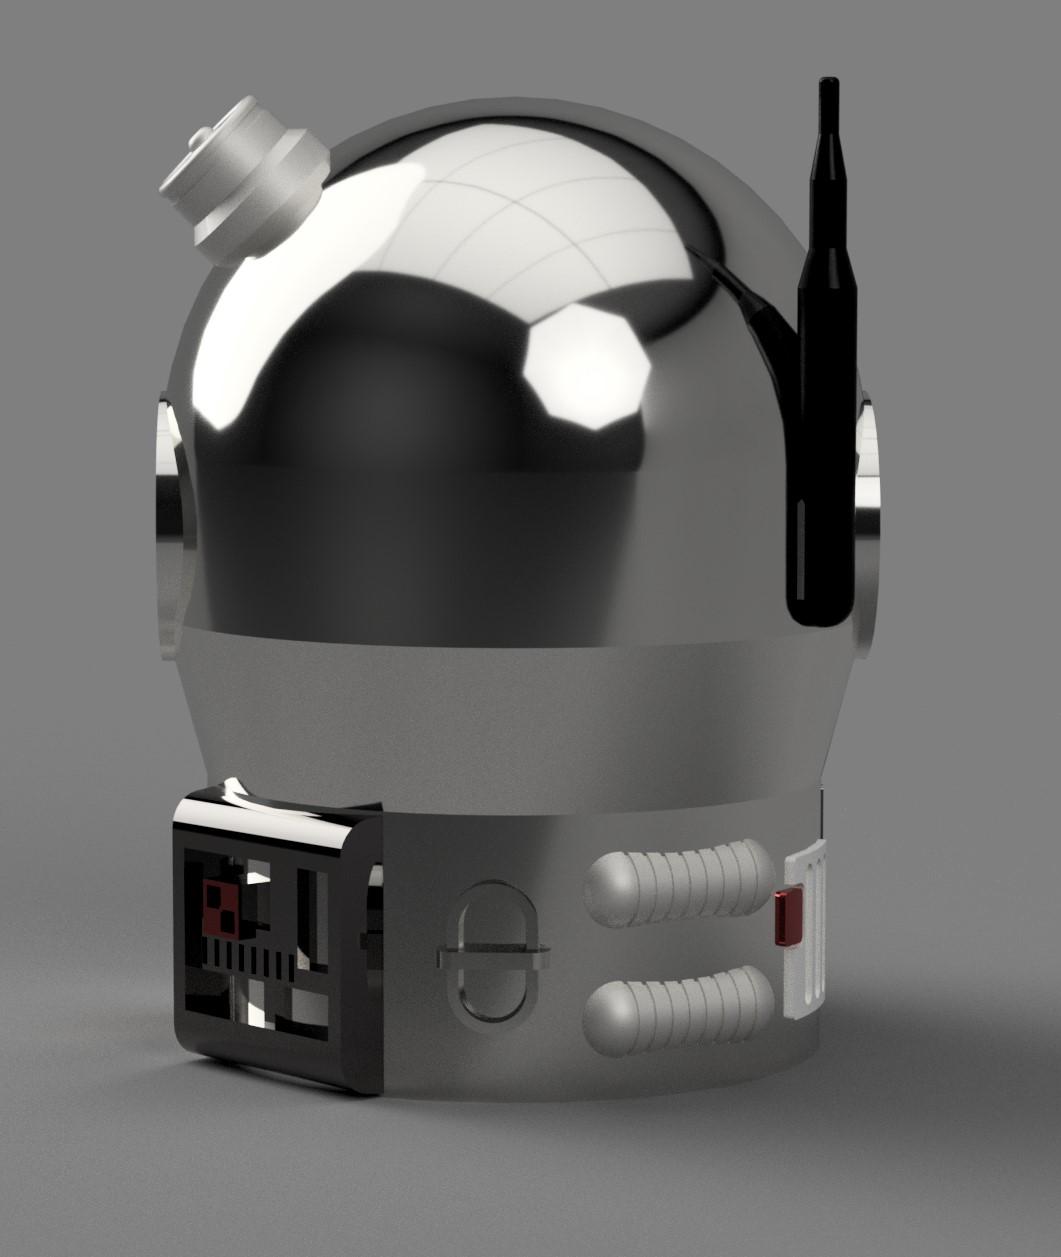 MM-A1 - Star Wars Inspired Droid 3d model